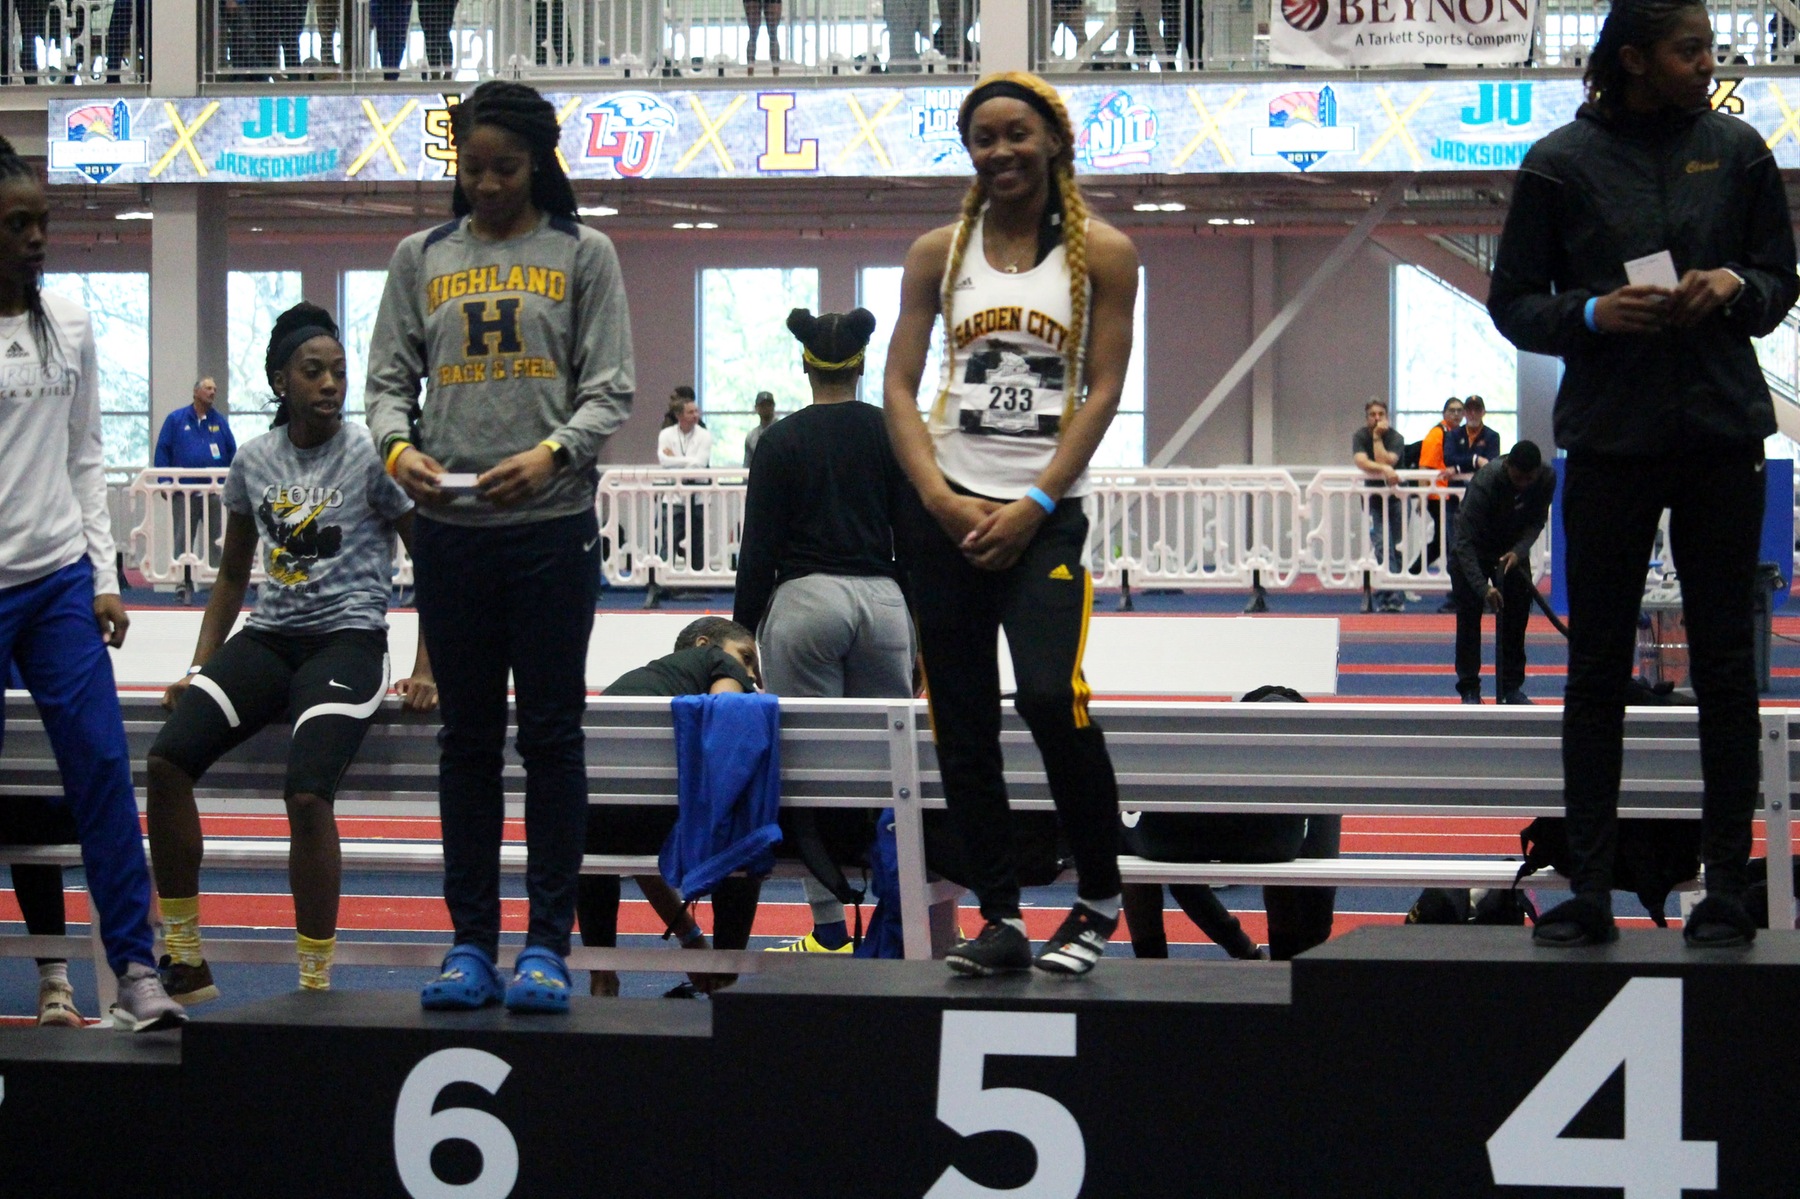 Octave shows out at Nationals; takes fifth in 60-meter hurdles